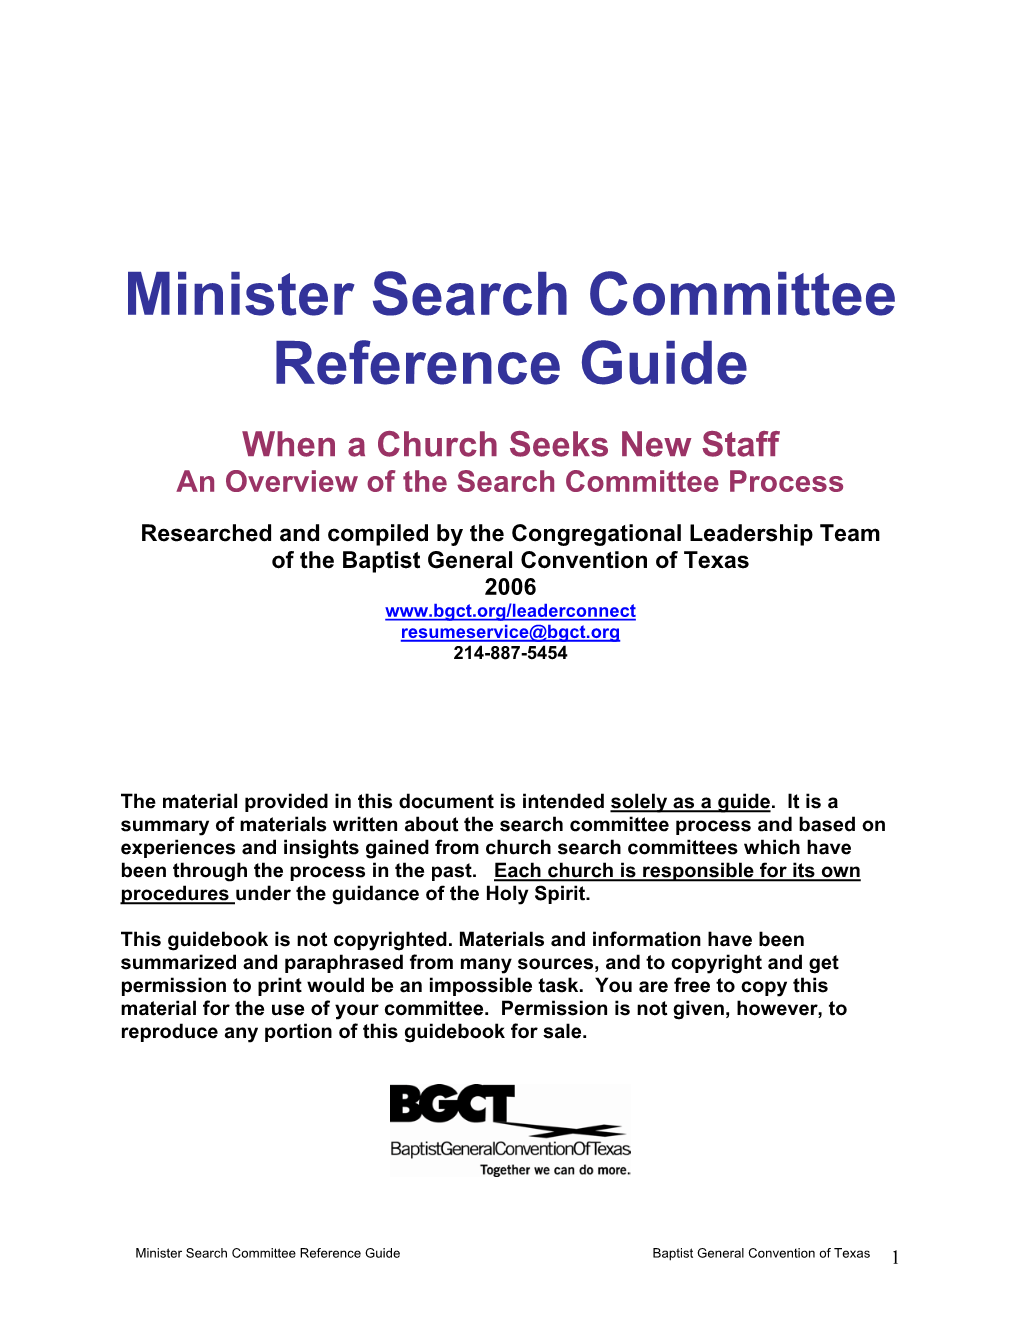 Minister Search Committee Reference Guide Baptist General Convention of Texas 1 Minister Search Committee Reference Guide